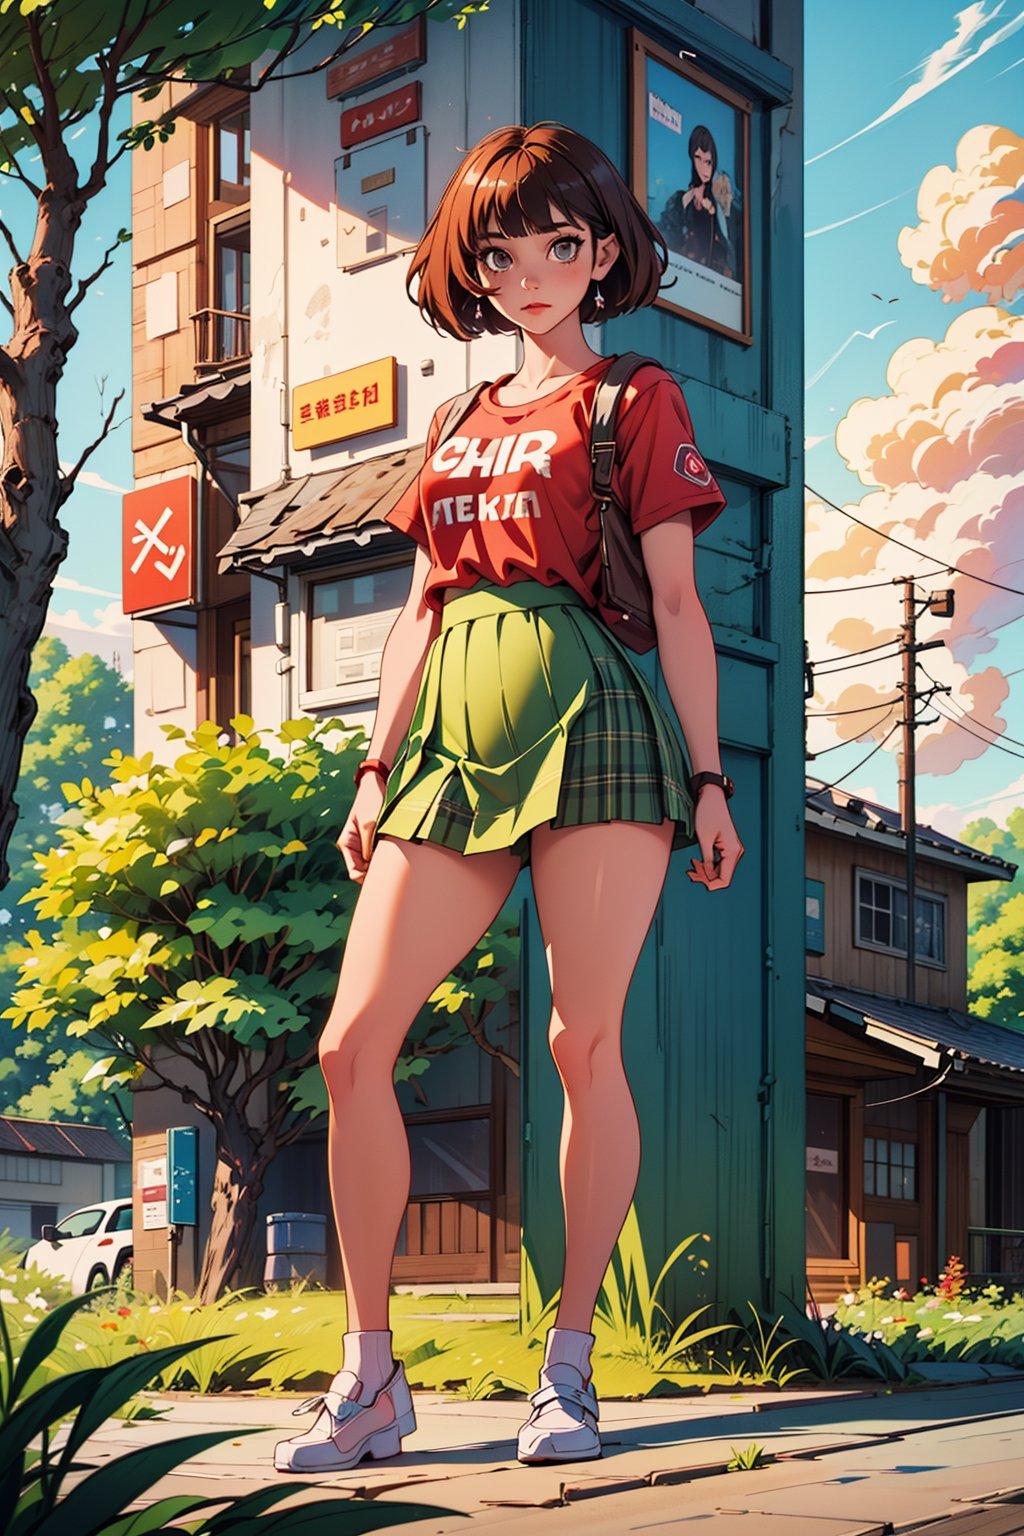 1 Girl, full body, curvy body, high quality, masterpiece, ultra high resolution, looking at viewers, real skin textures, realistic eyes and face details, soft makeup, short fluffy hair, straight hair, light brown eyes, short skirt, nature background, plaid skirts, light red T-shirt, bangs, detailed eyes, perfect hands, perfect feet, hdr, 4k, 8k, ultra HD